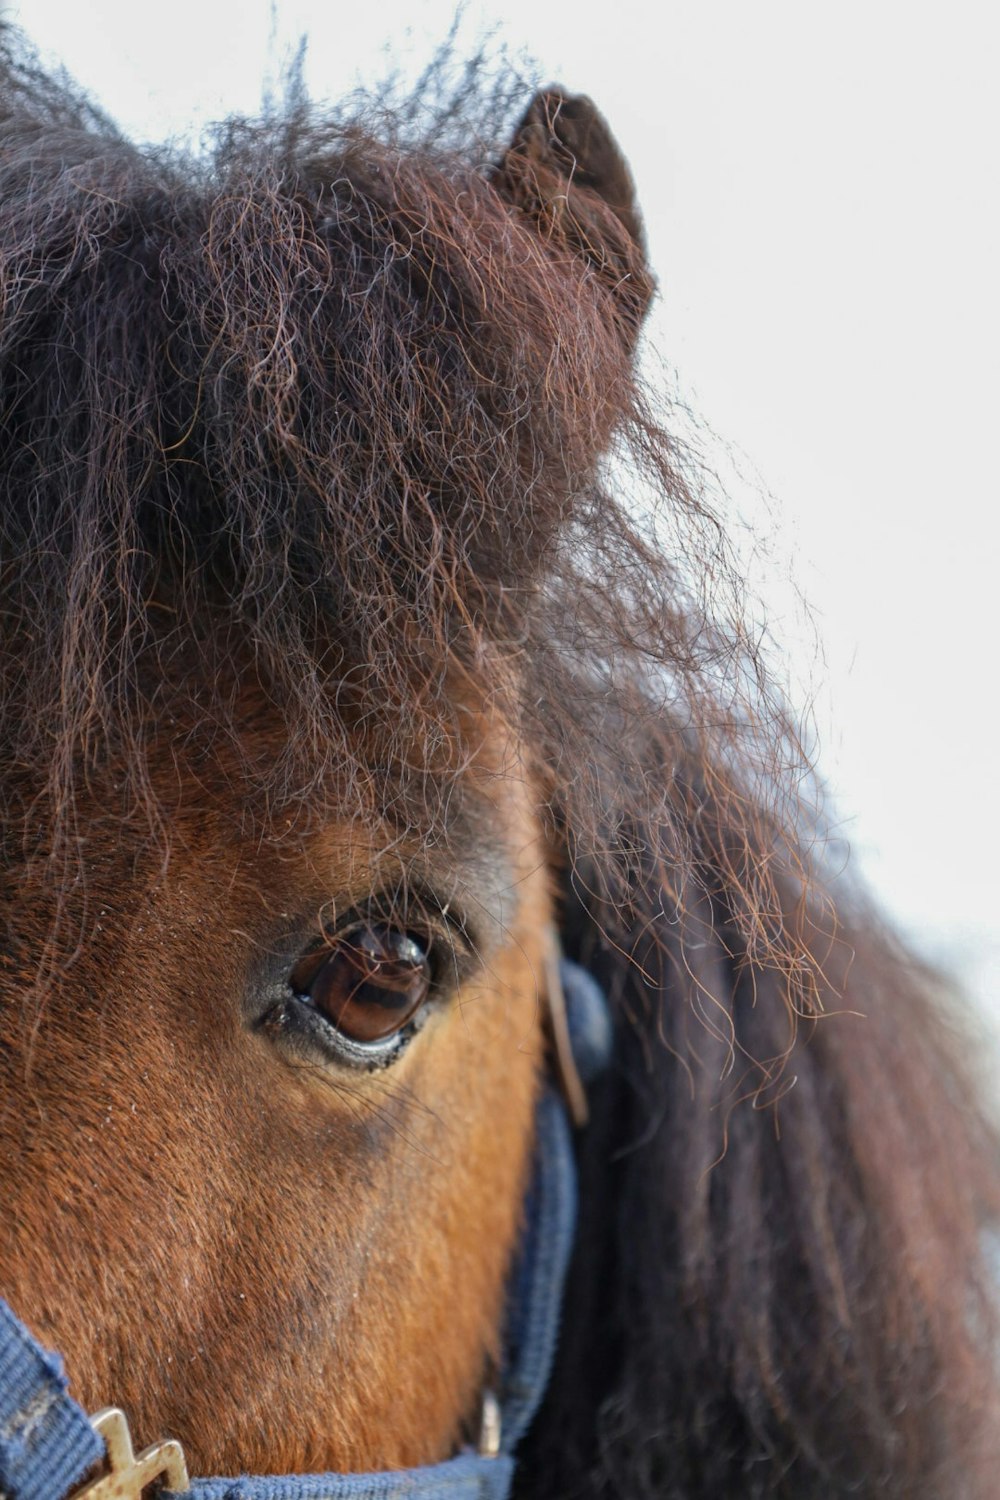 a close up of a horse's face with long hair